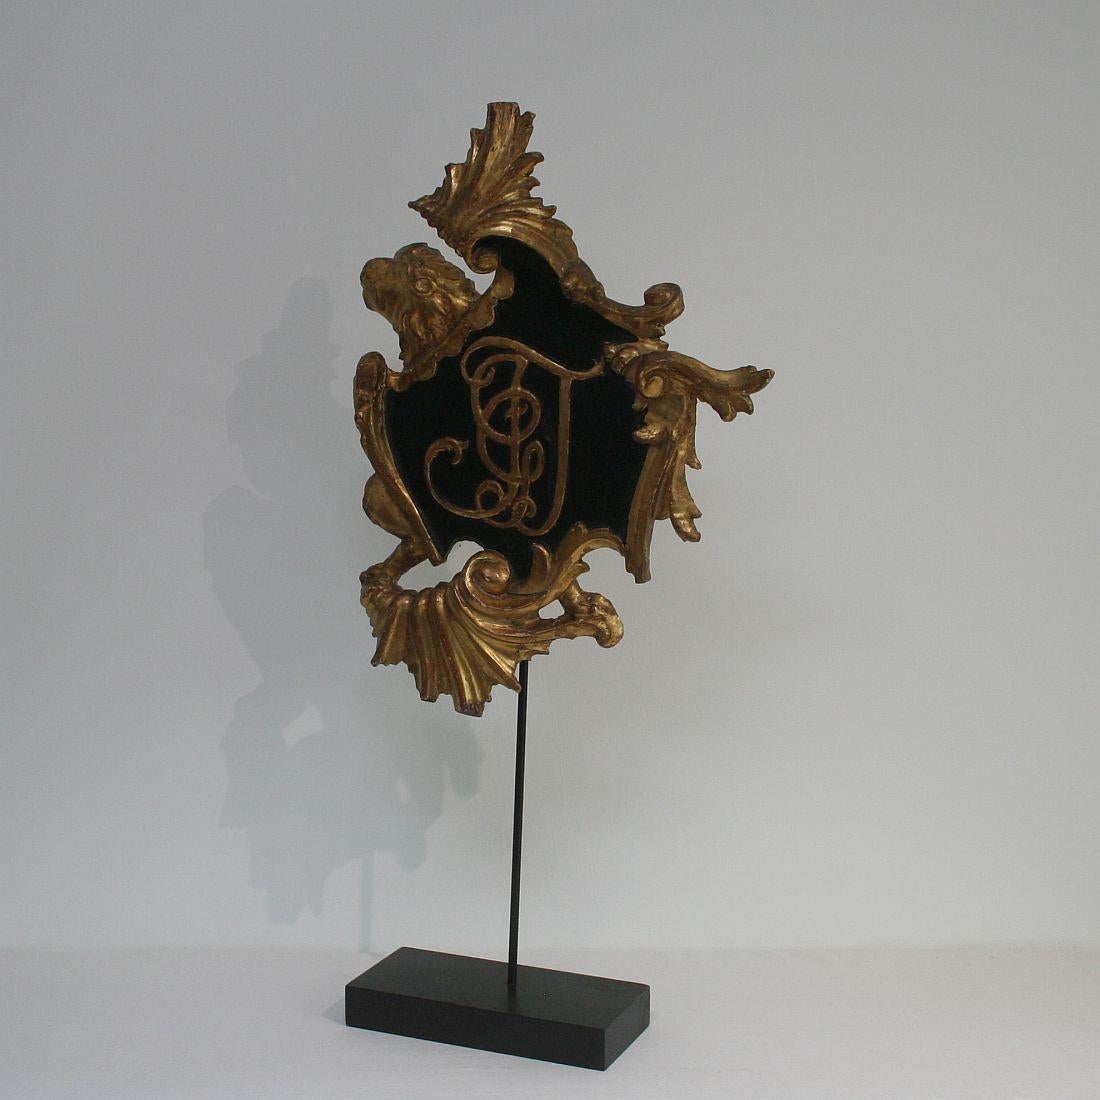 Hand-Carved Italian 18th Century Baroque Gilded Coat of Arms with Lion